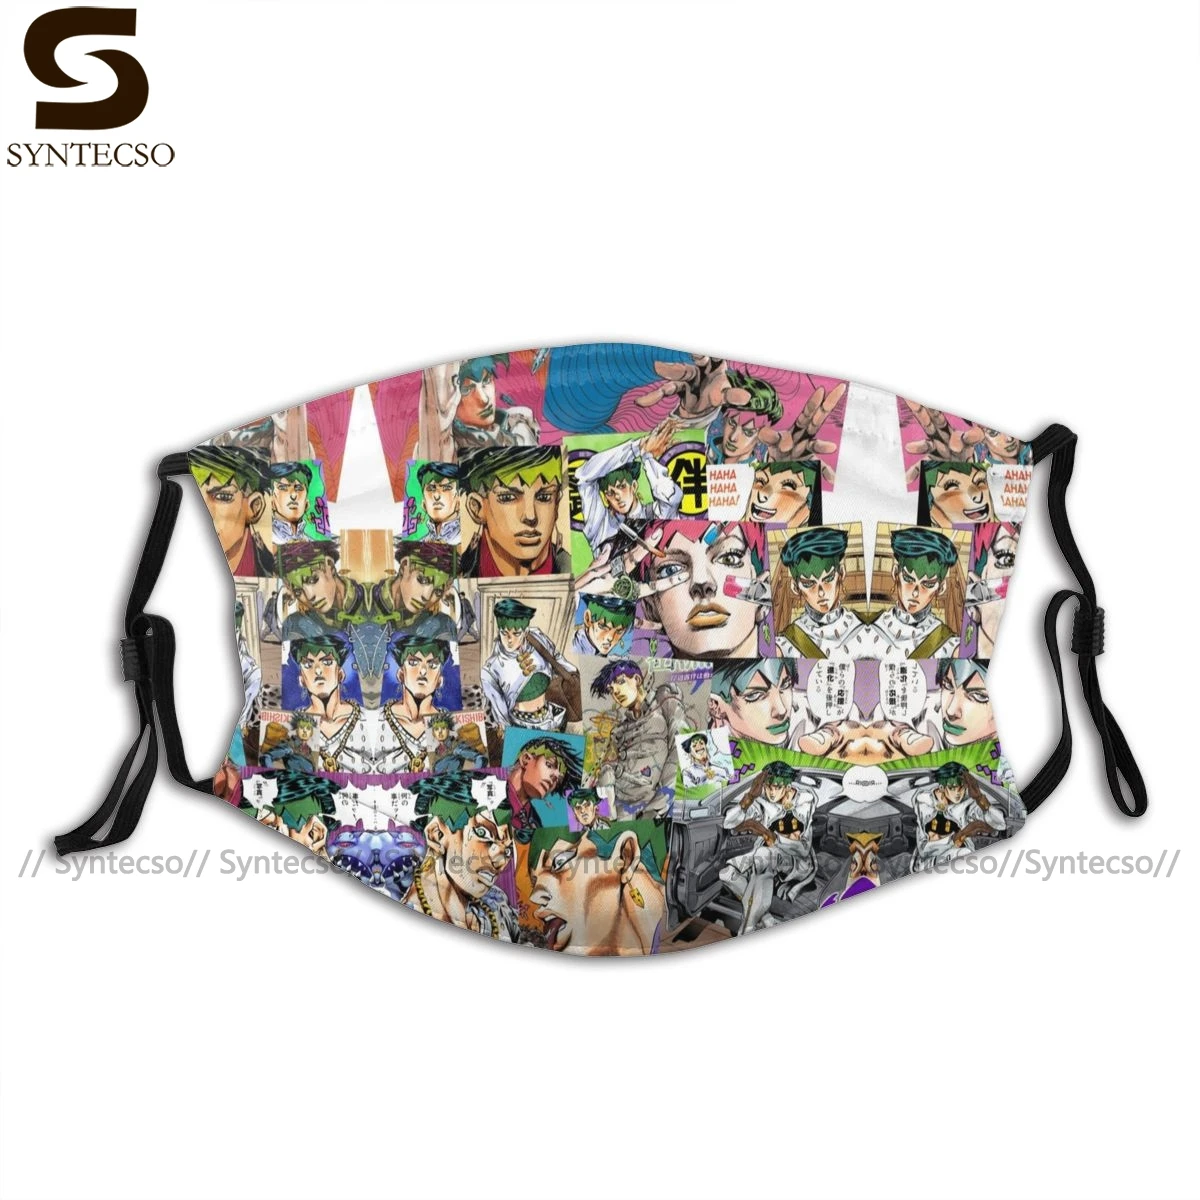 

Jojo Bizarre Mouth Face Mask JJBA Rohan Kishibe Collage Facial Mask Fashion Funny with 2 Filters for Adult